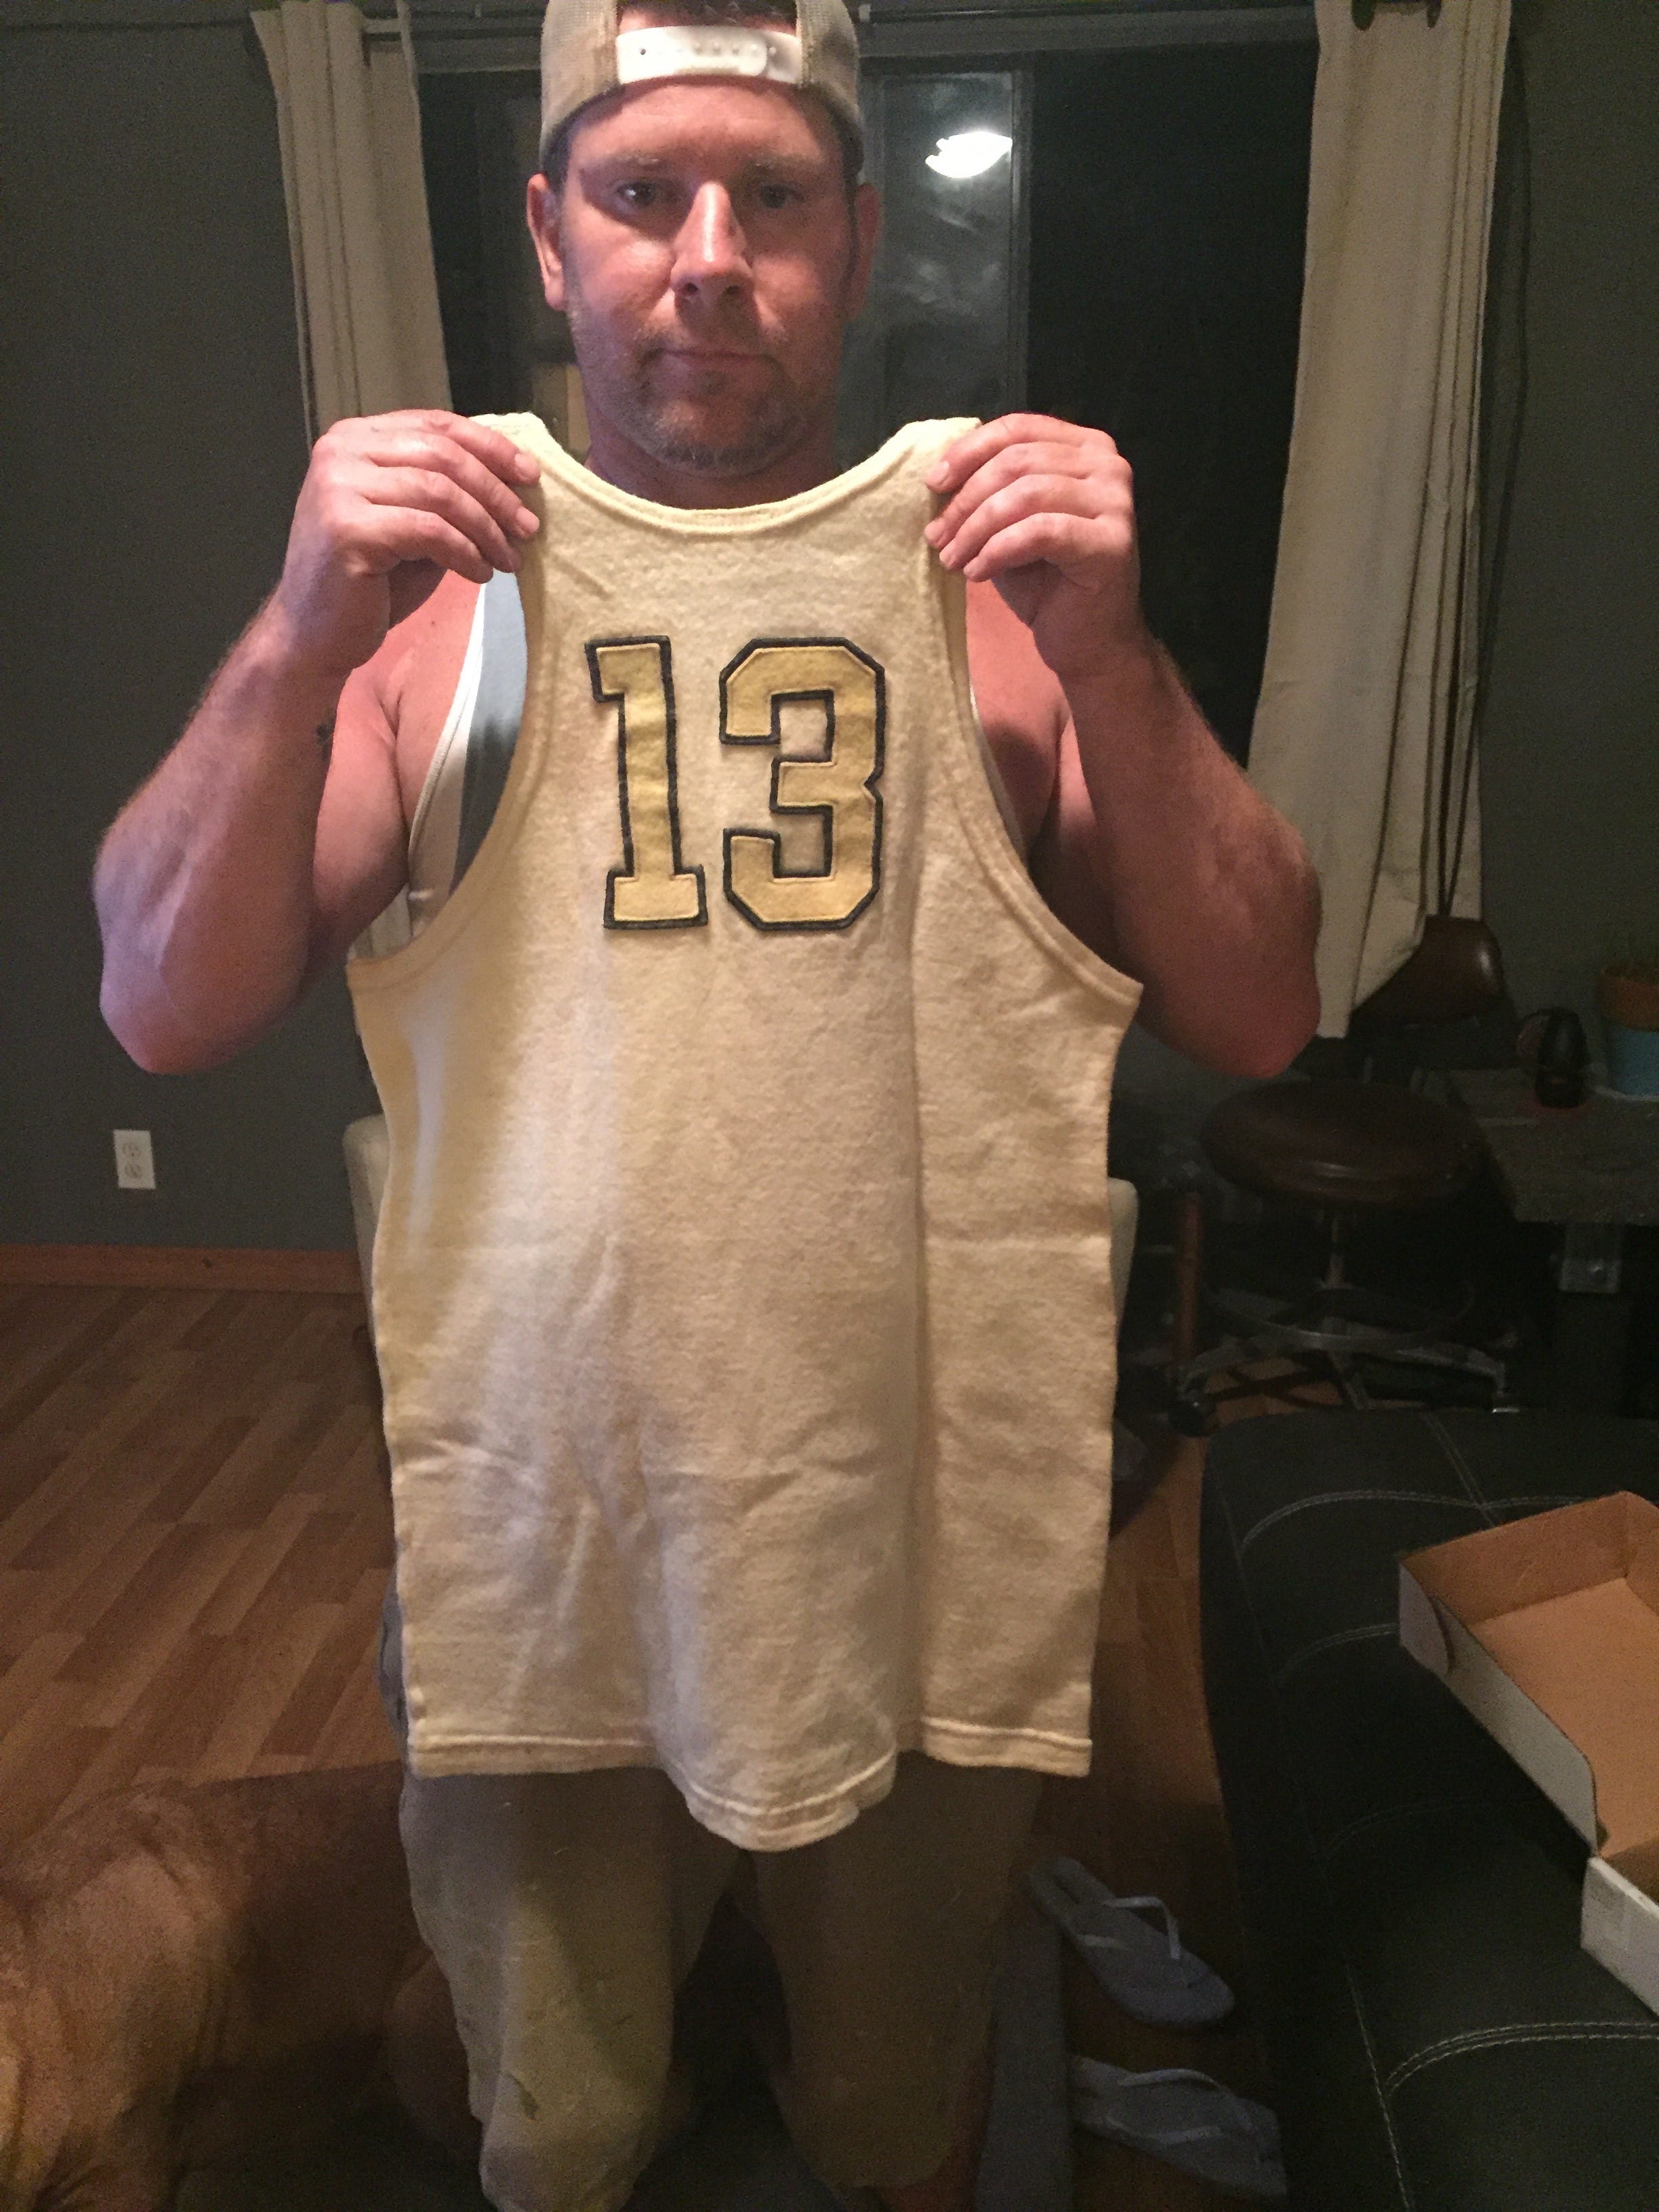 drew brees jersey number at purdue